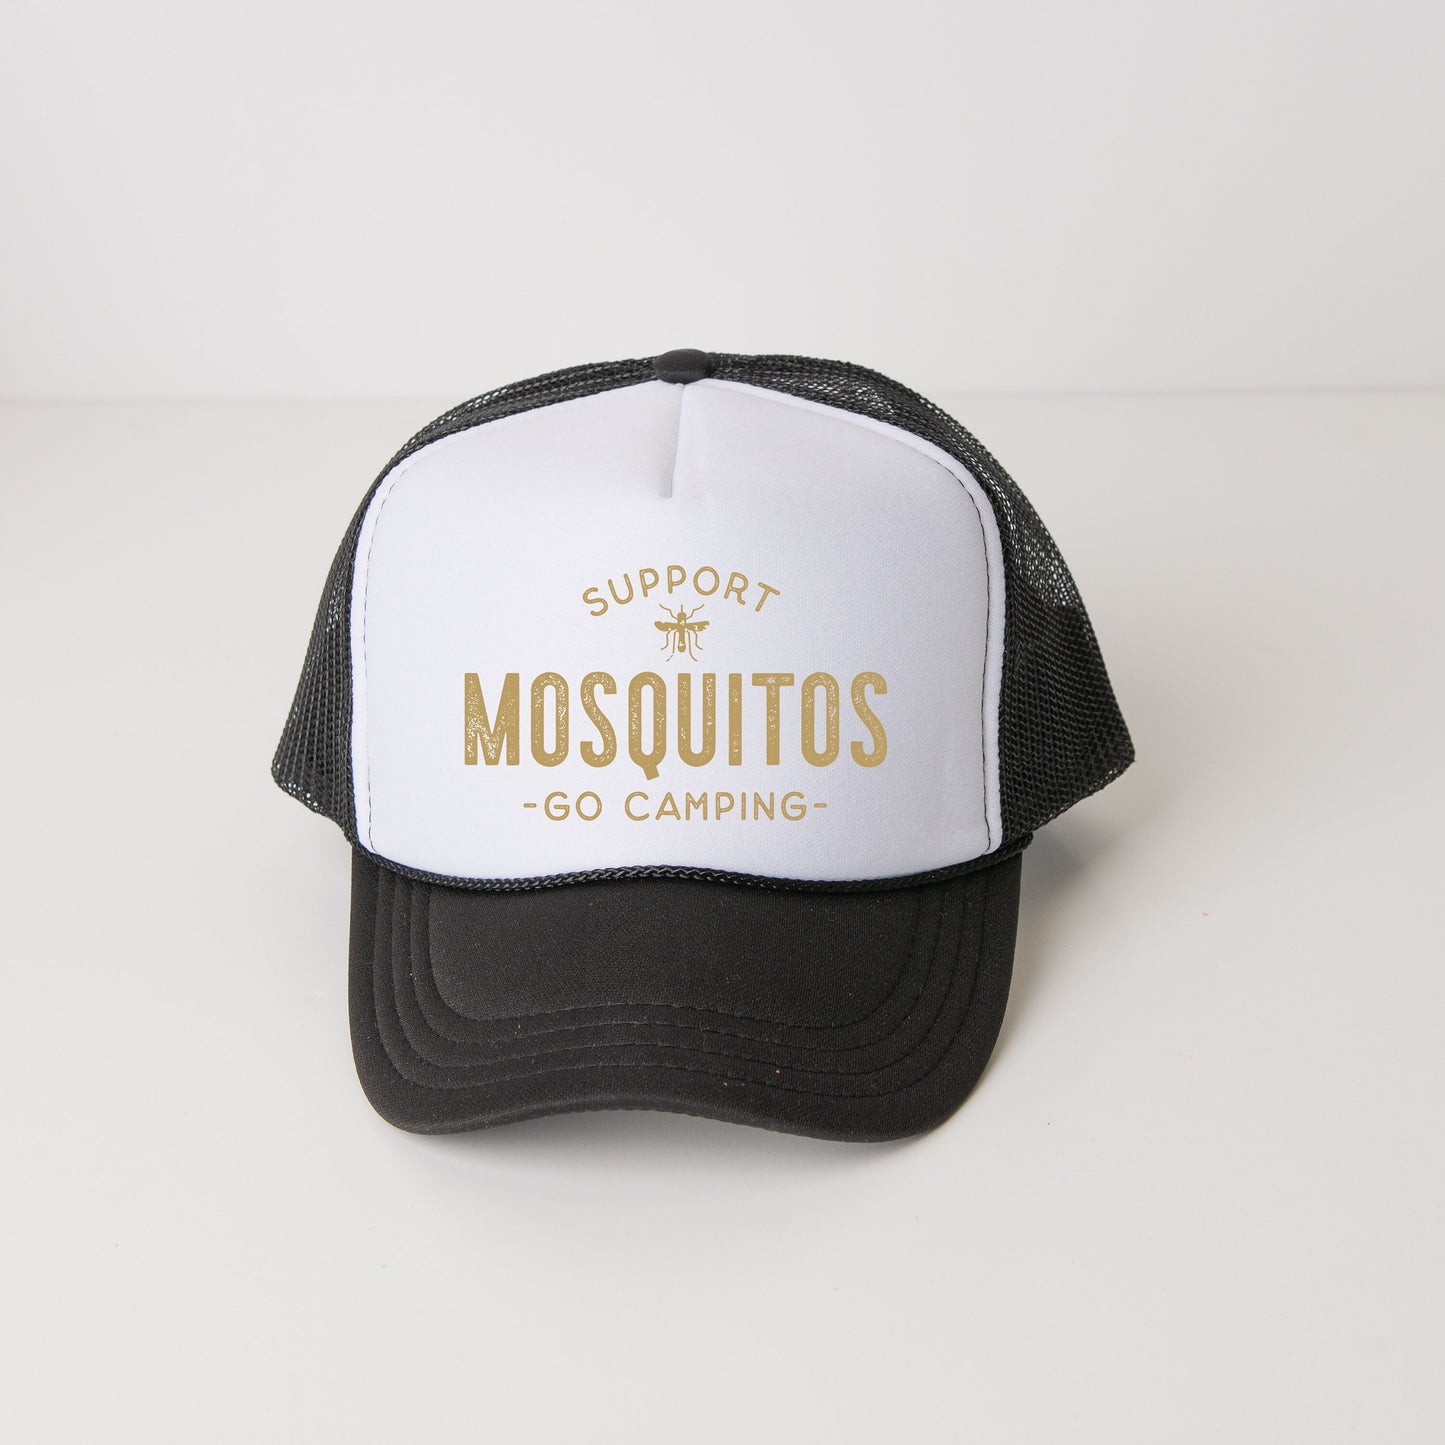 a black and white trucker hat that says support mosquitoos go camping